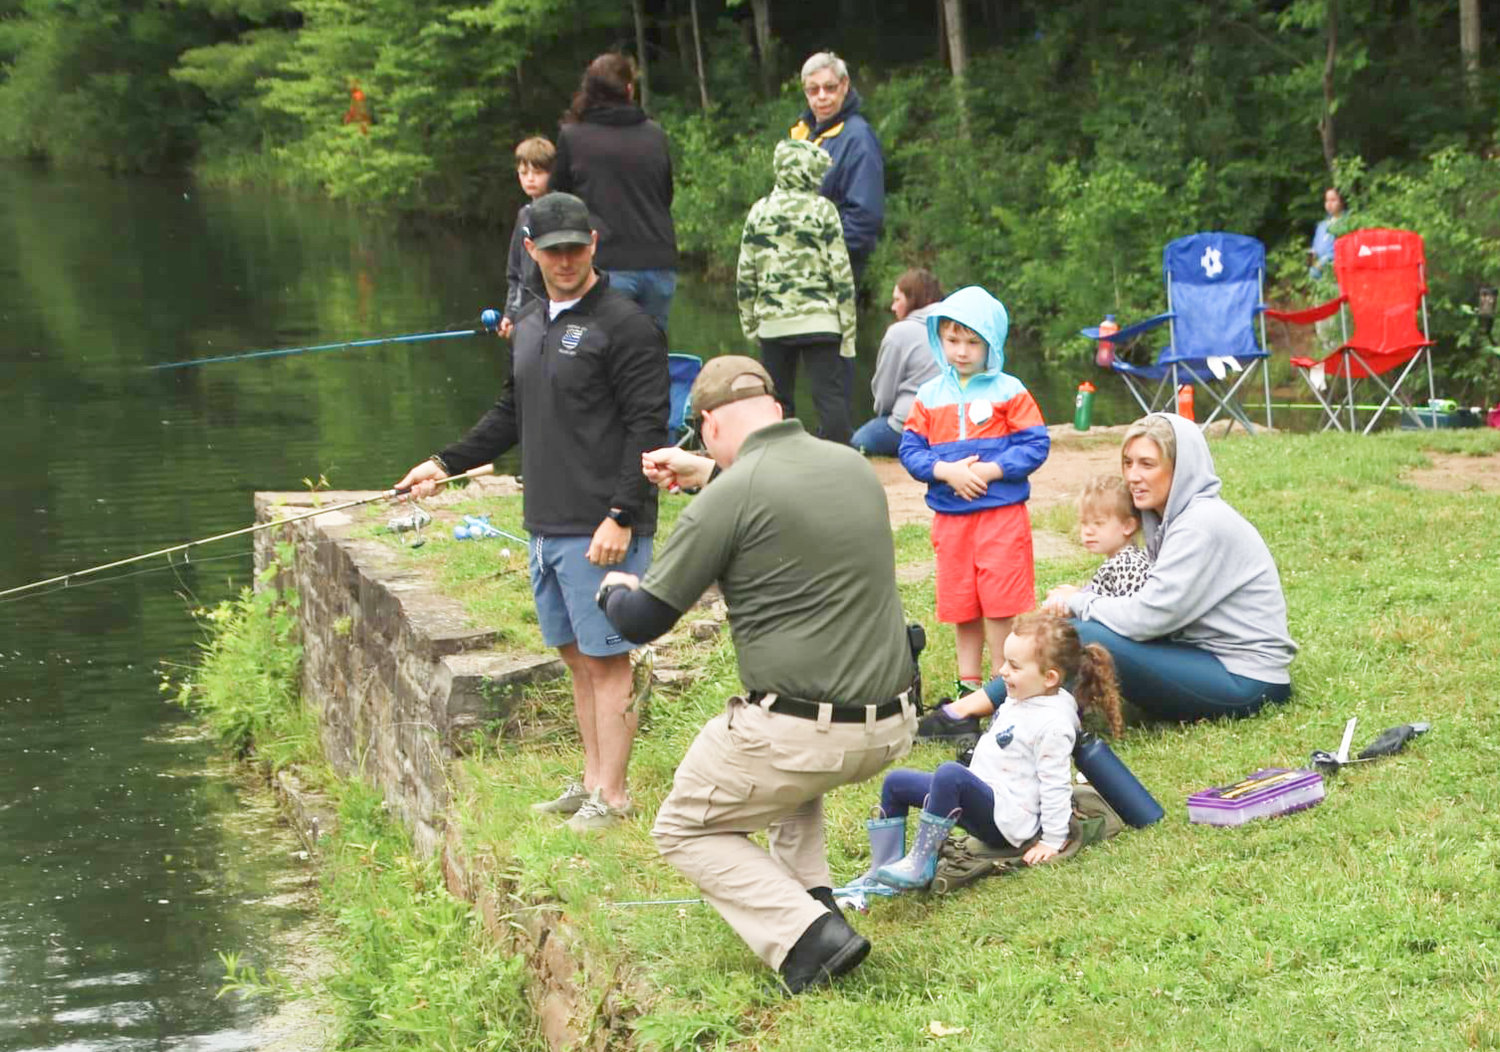 Cops N Bobbers 2022 saw the Oneida Police Department and the City of Oneida Parks and Recreation Department coming together to take children out to fish on June 18 at Mount Hope Park in Oneida. Children were shown how to tie hooks and cast their rods in the hope of catching the fish that swim in their waters.